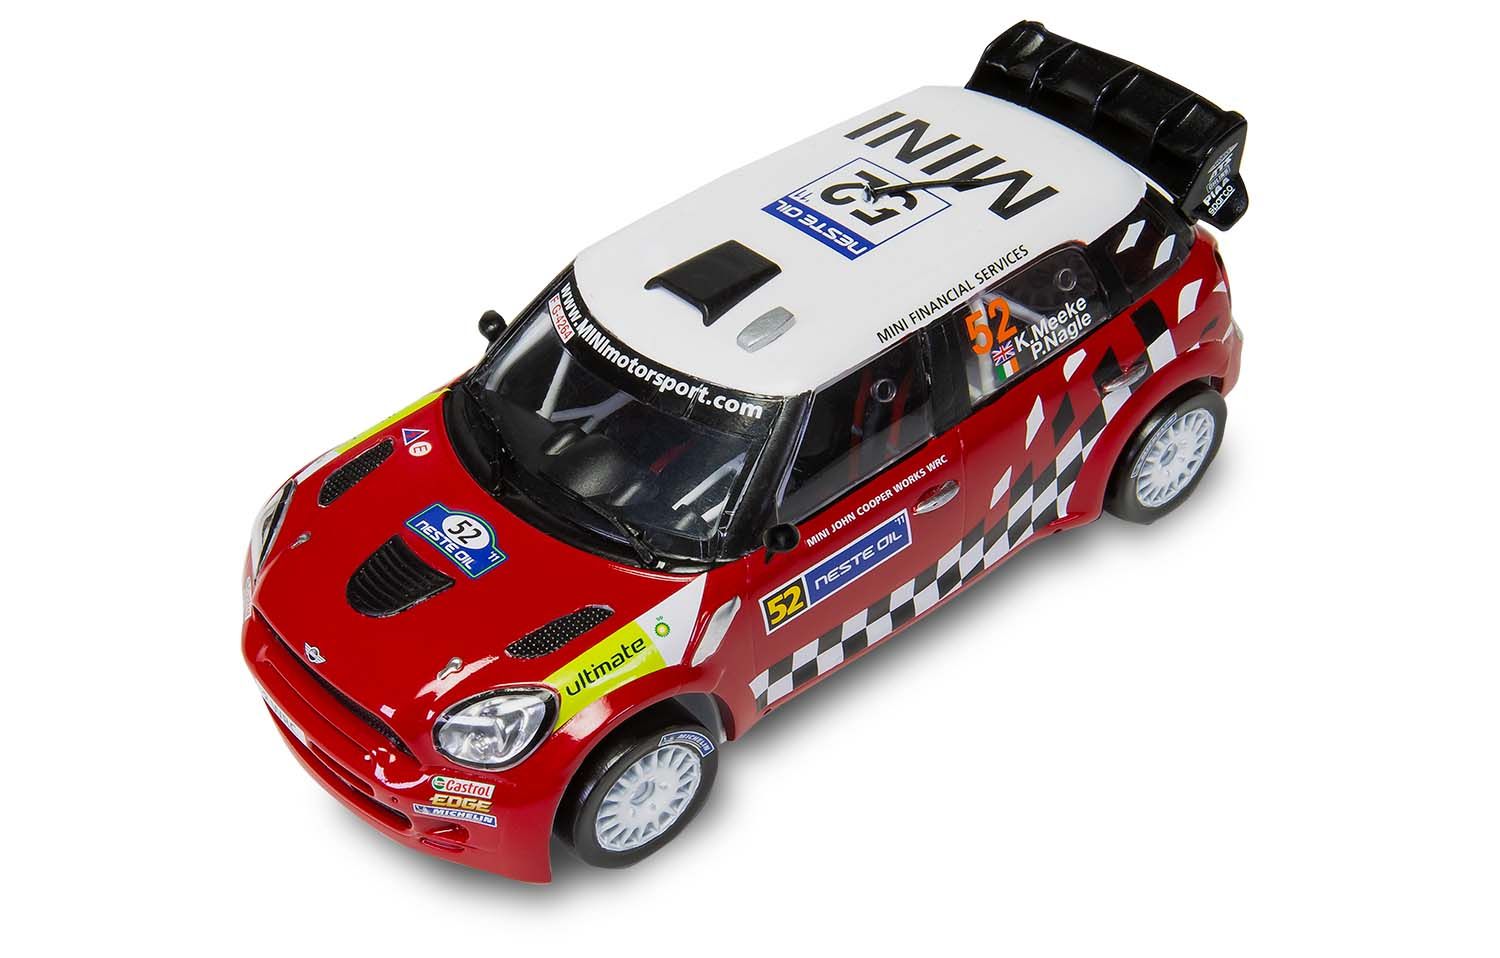 Airfix Mini Cooper S 1:32 - Scale Modelling Now